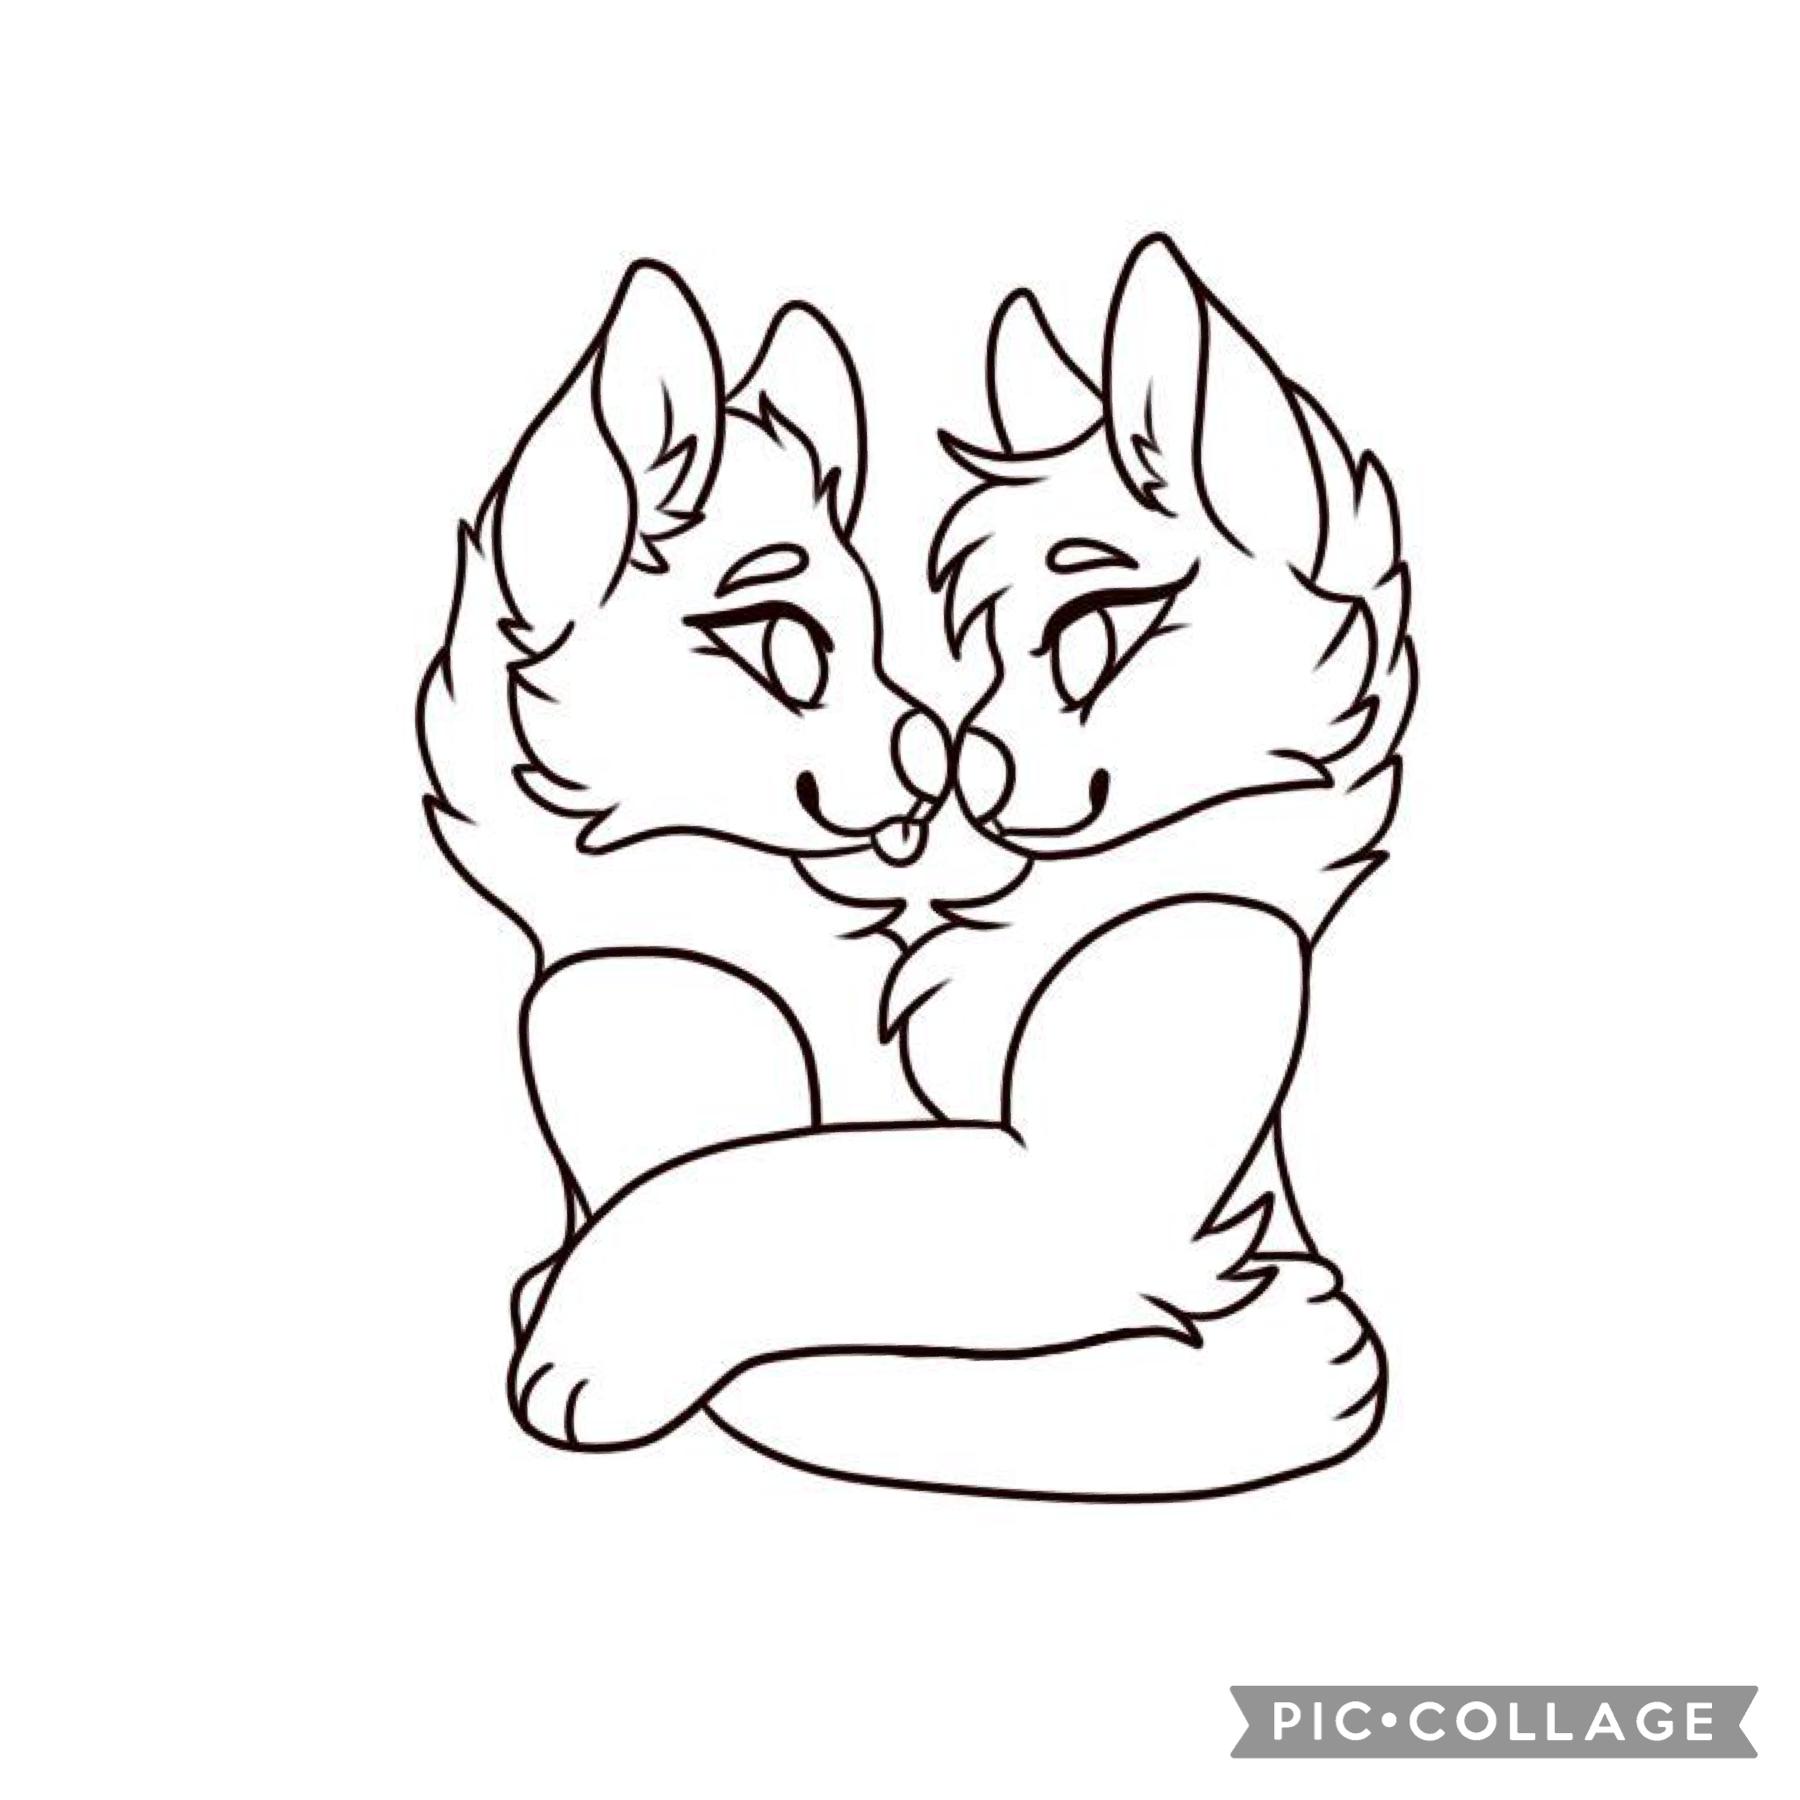 Coloring page for anyone